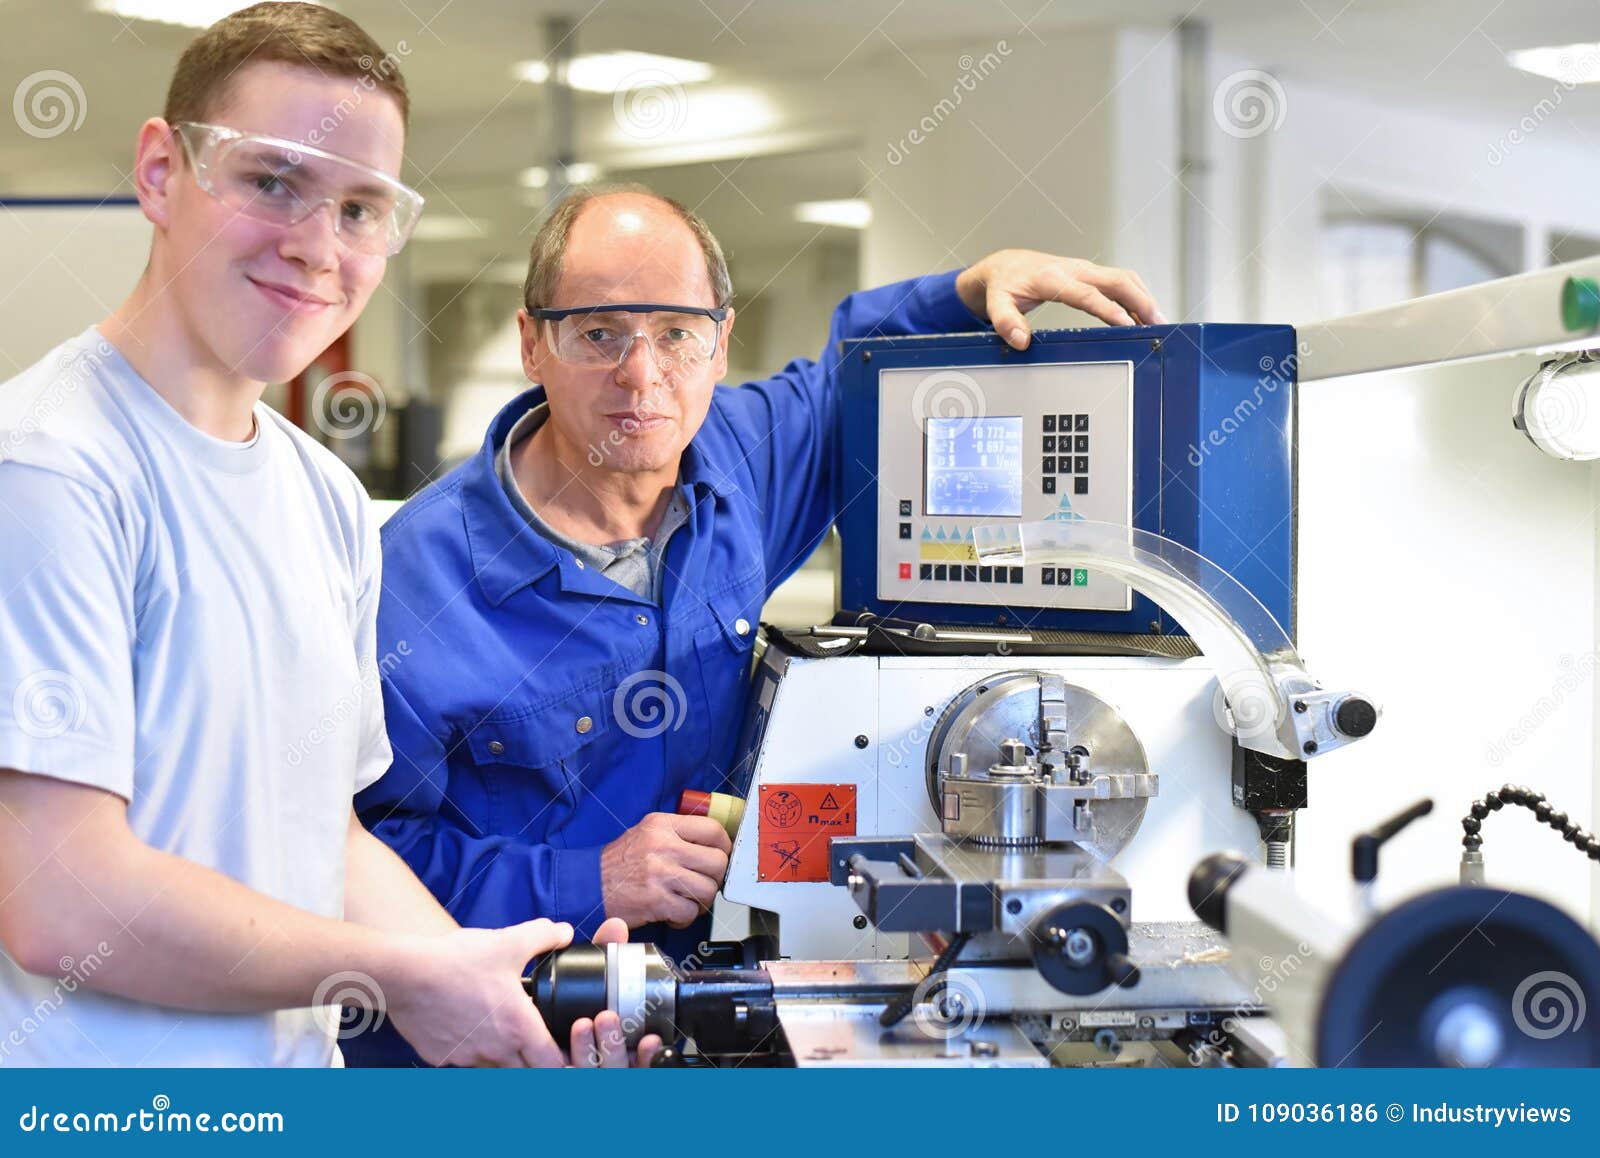 portrait apprentice and teacher in vocational training at a cnc